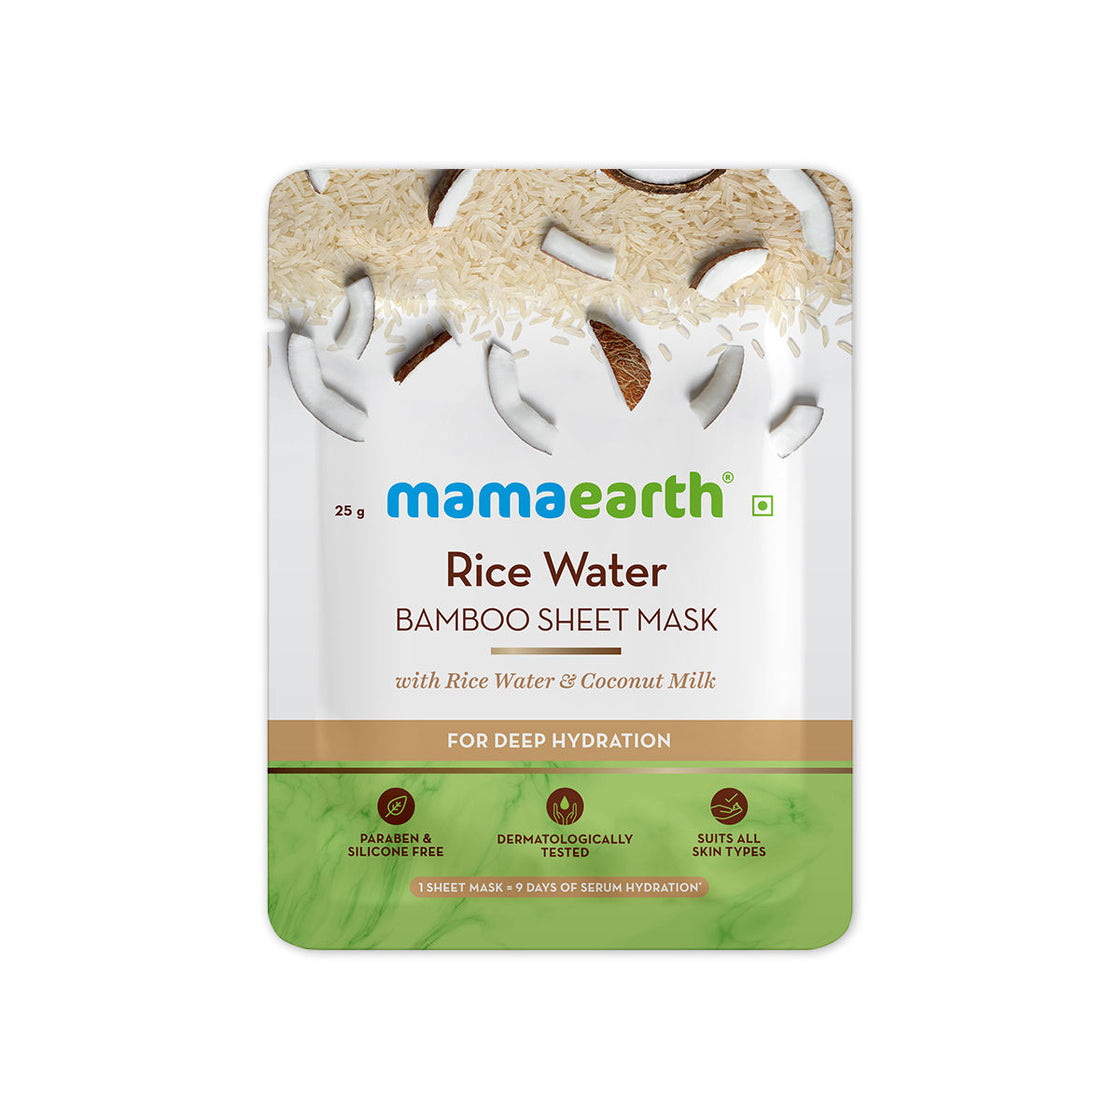 Mamaearth Rice Water Bamboo Sheet Mask With Rice Water & Coconut Milk For Deep Hydration - 25 G-8